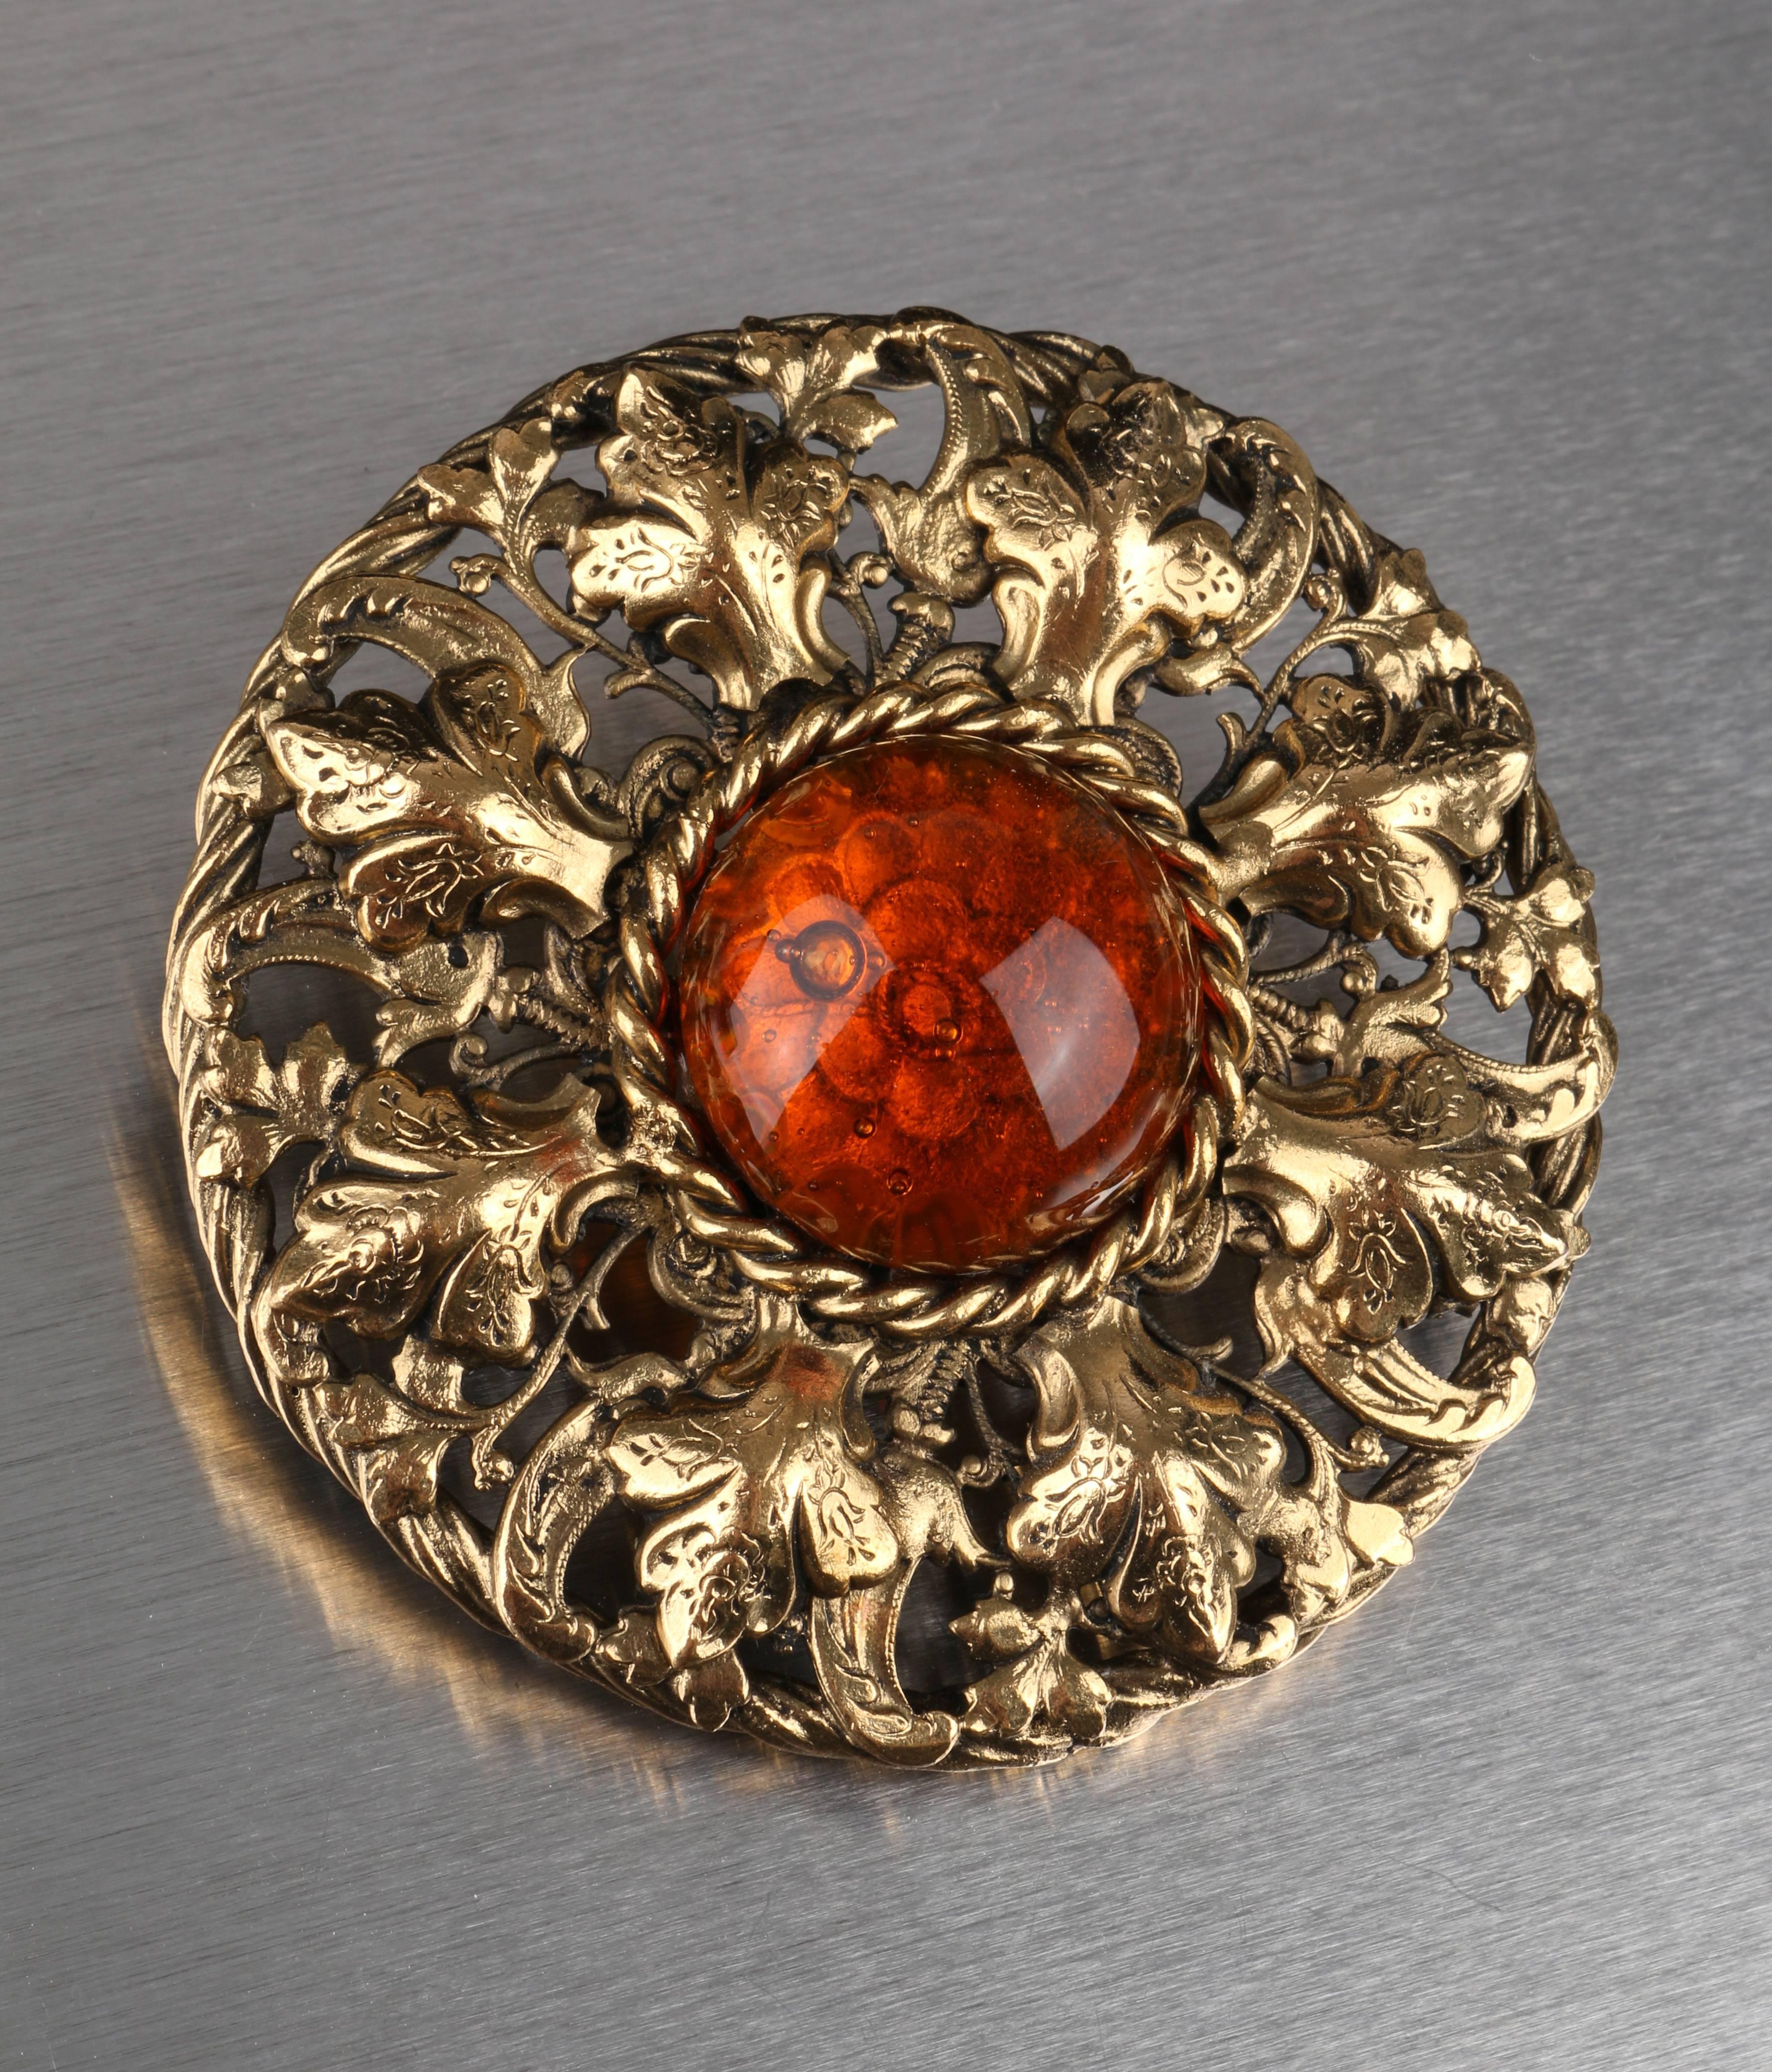 Chanel Autumn/ WInter 1995 large gold-tone metal brooch with central amber-colored Gripoix poured glass cabochon (measures approximately 33 mm). Floral camellia detail is visible through the cabochon. Back pin closure. Back hook allows brooch to be